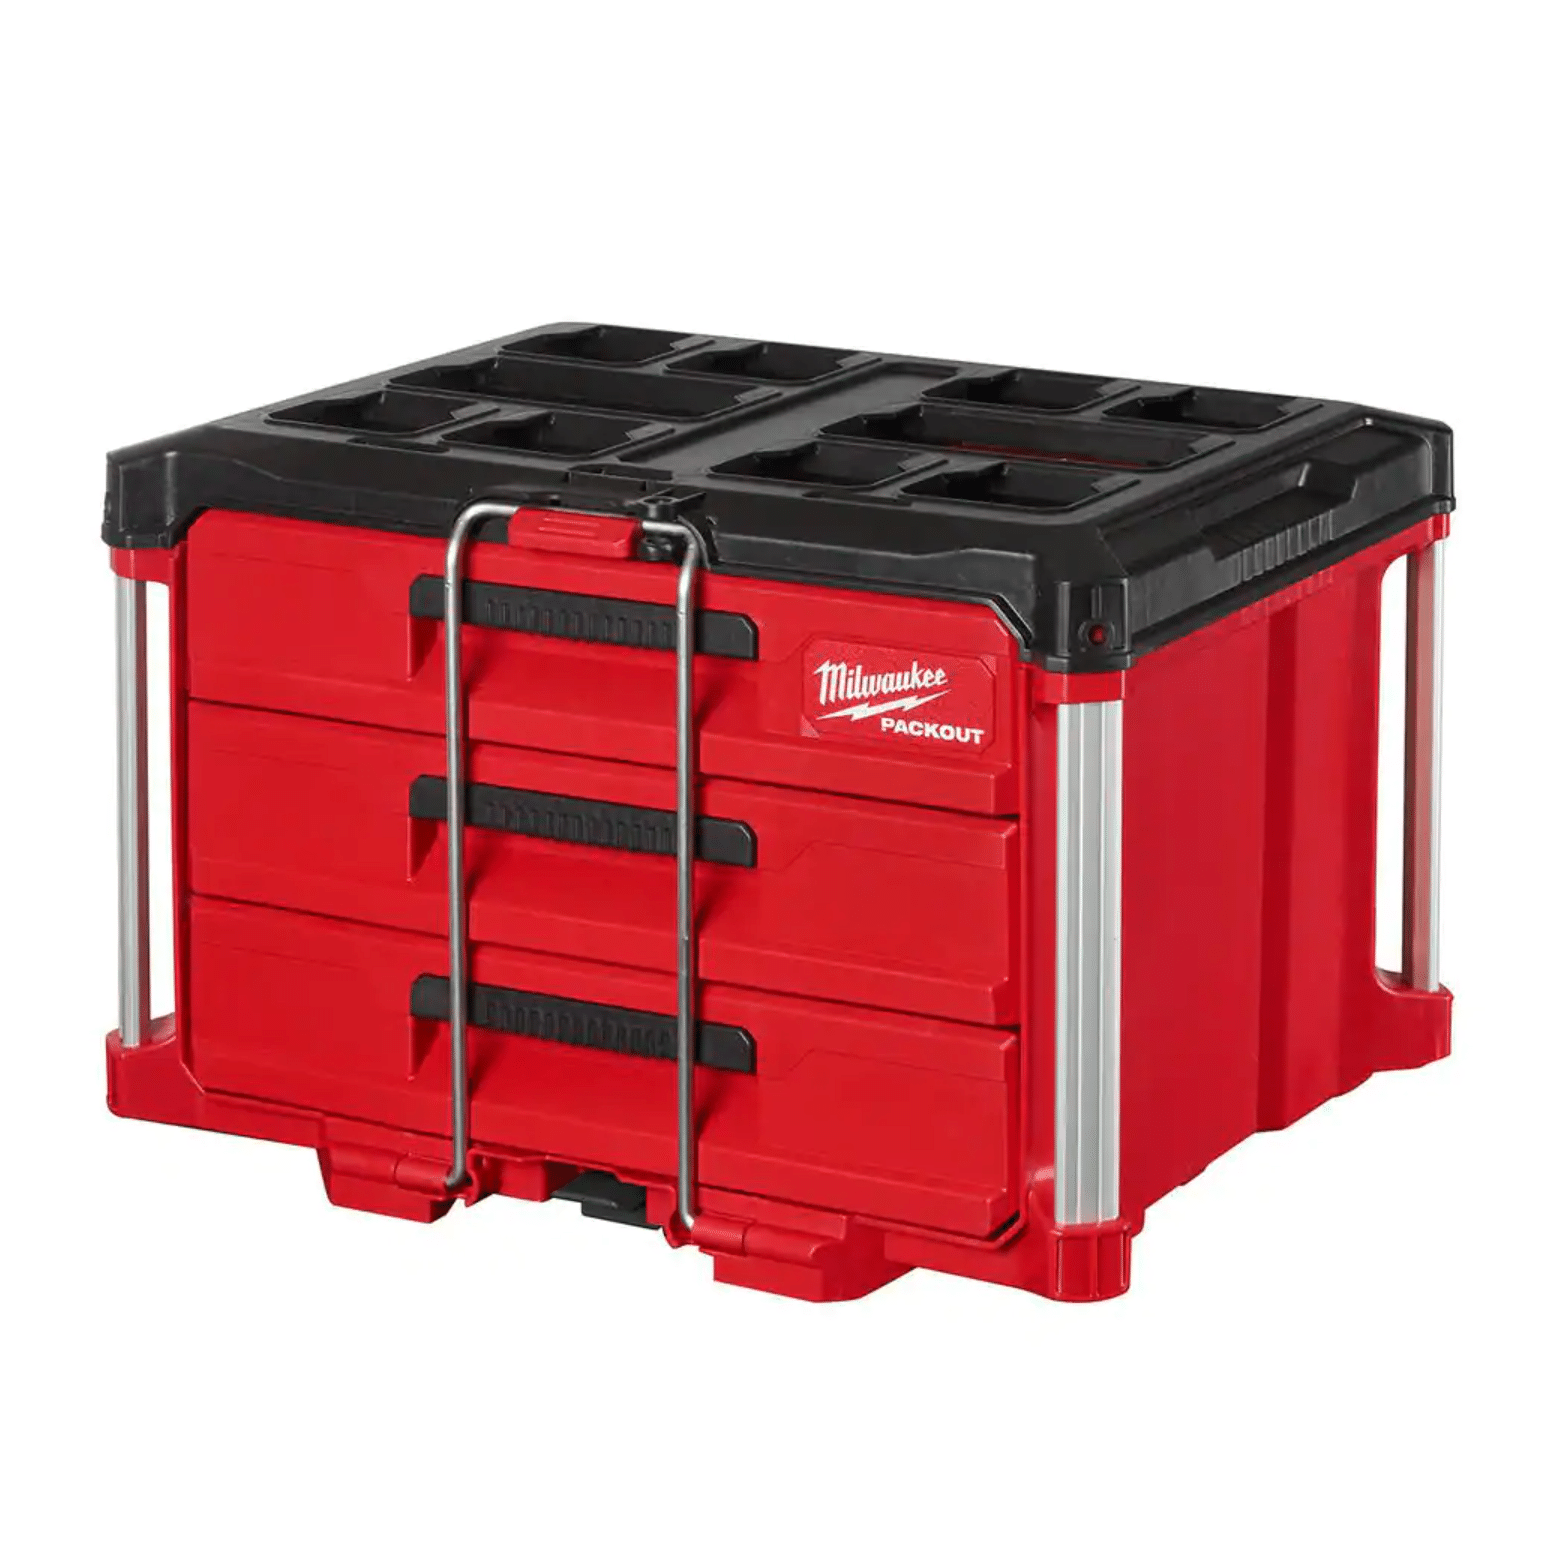 Milwaukee Packout 22 in. Modular 3-Drawer Tool Box with Metal Reinforced Corners (48-22-8443)